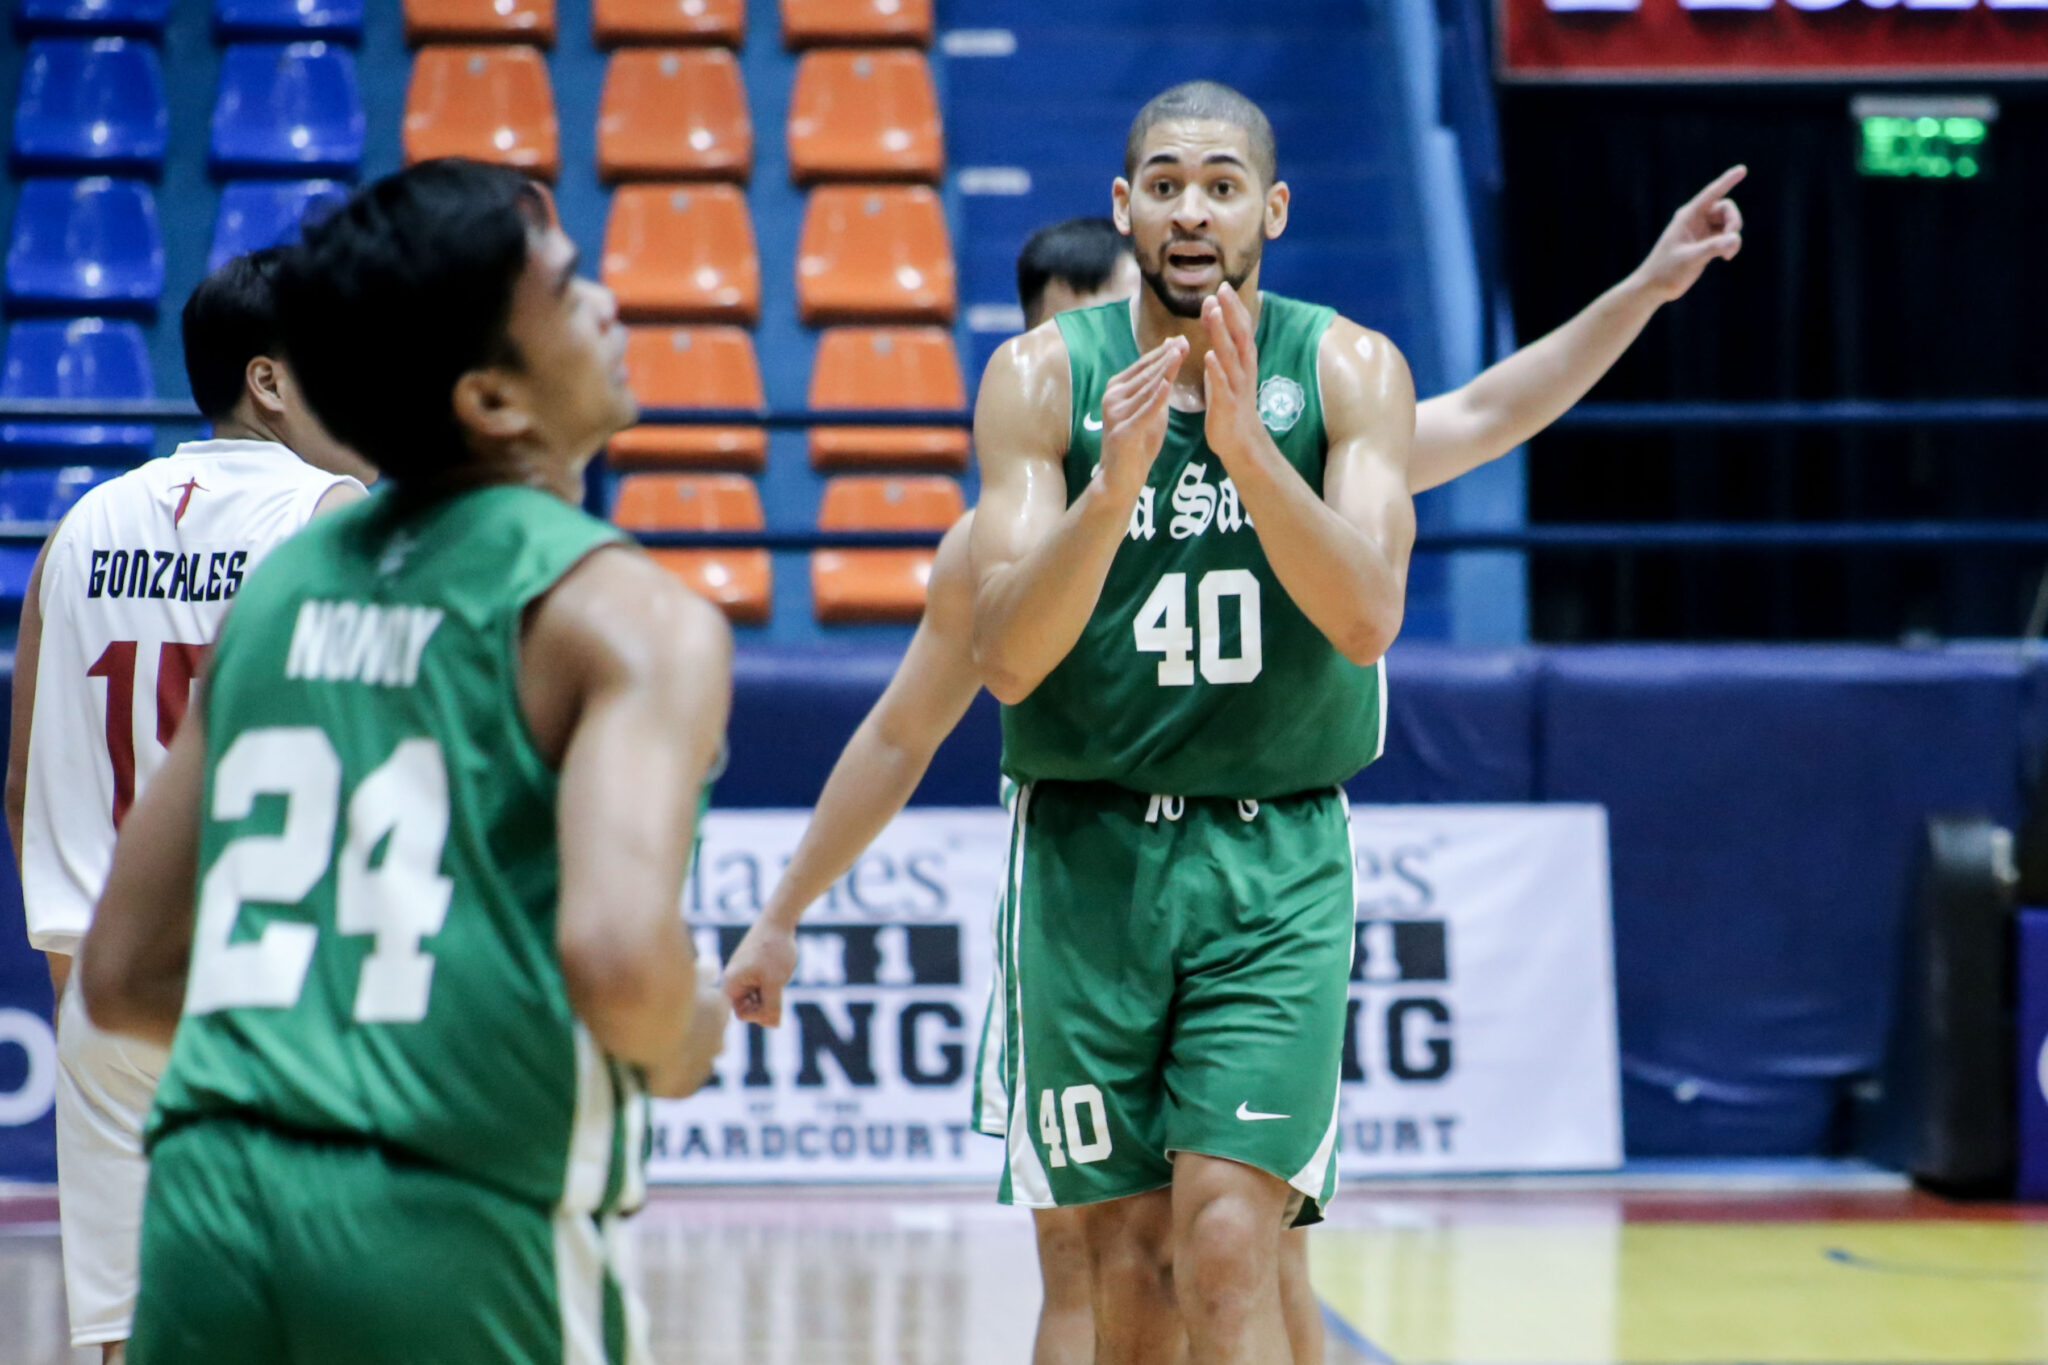 Mike Phillips, fresh off SEA Games gold, helps La Salle stay undefeated ...